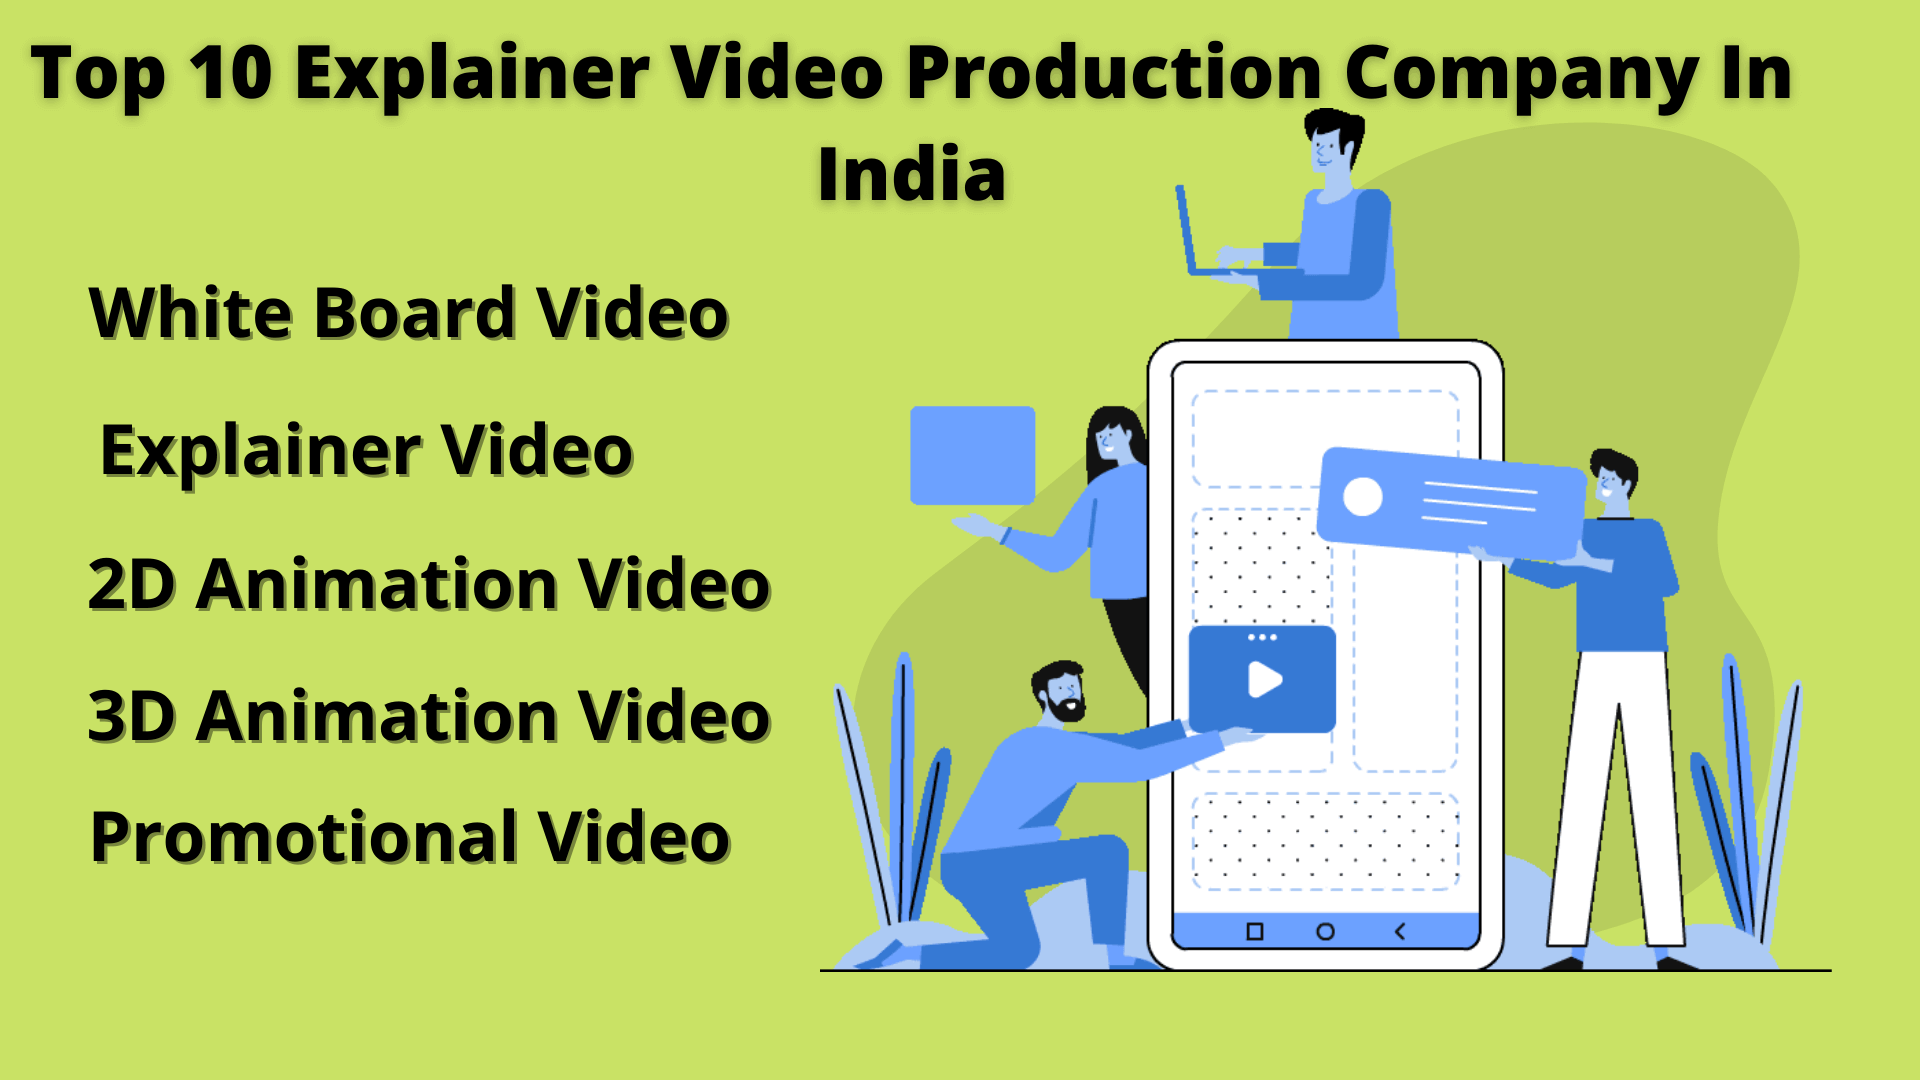 Top 10 Explainer Video Company In India | IFA SOFTECH